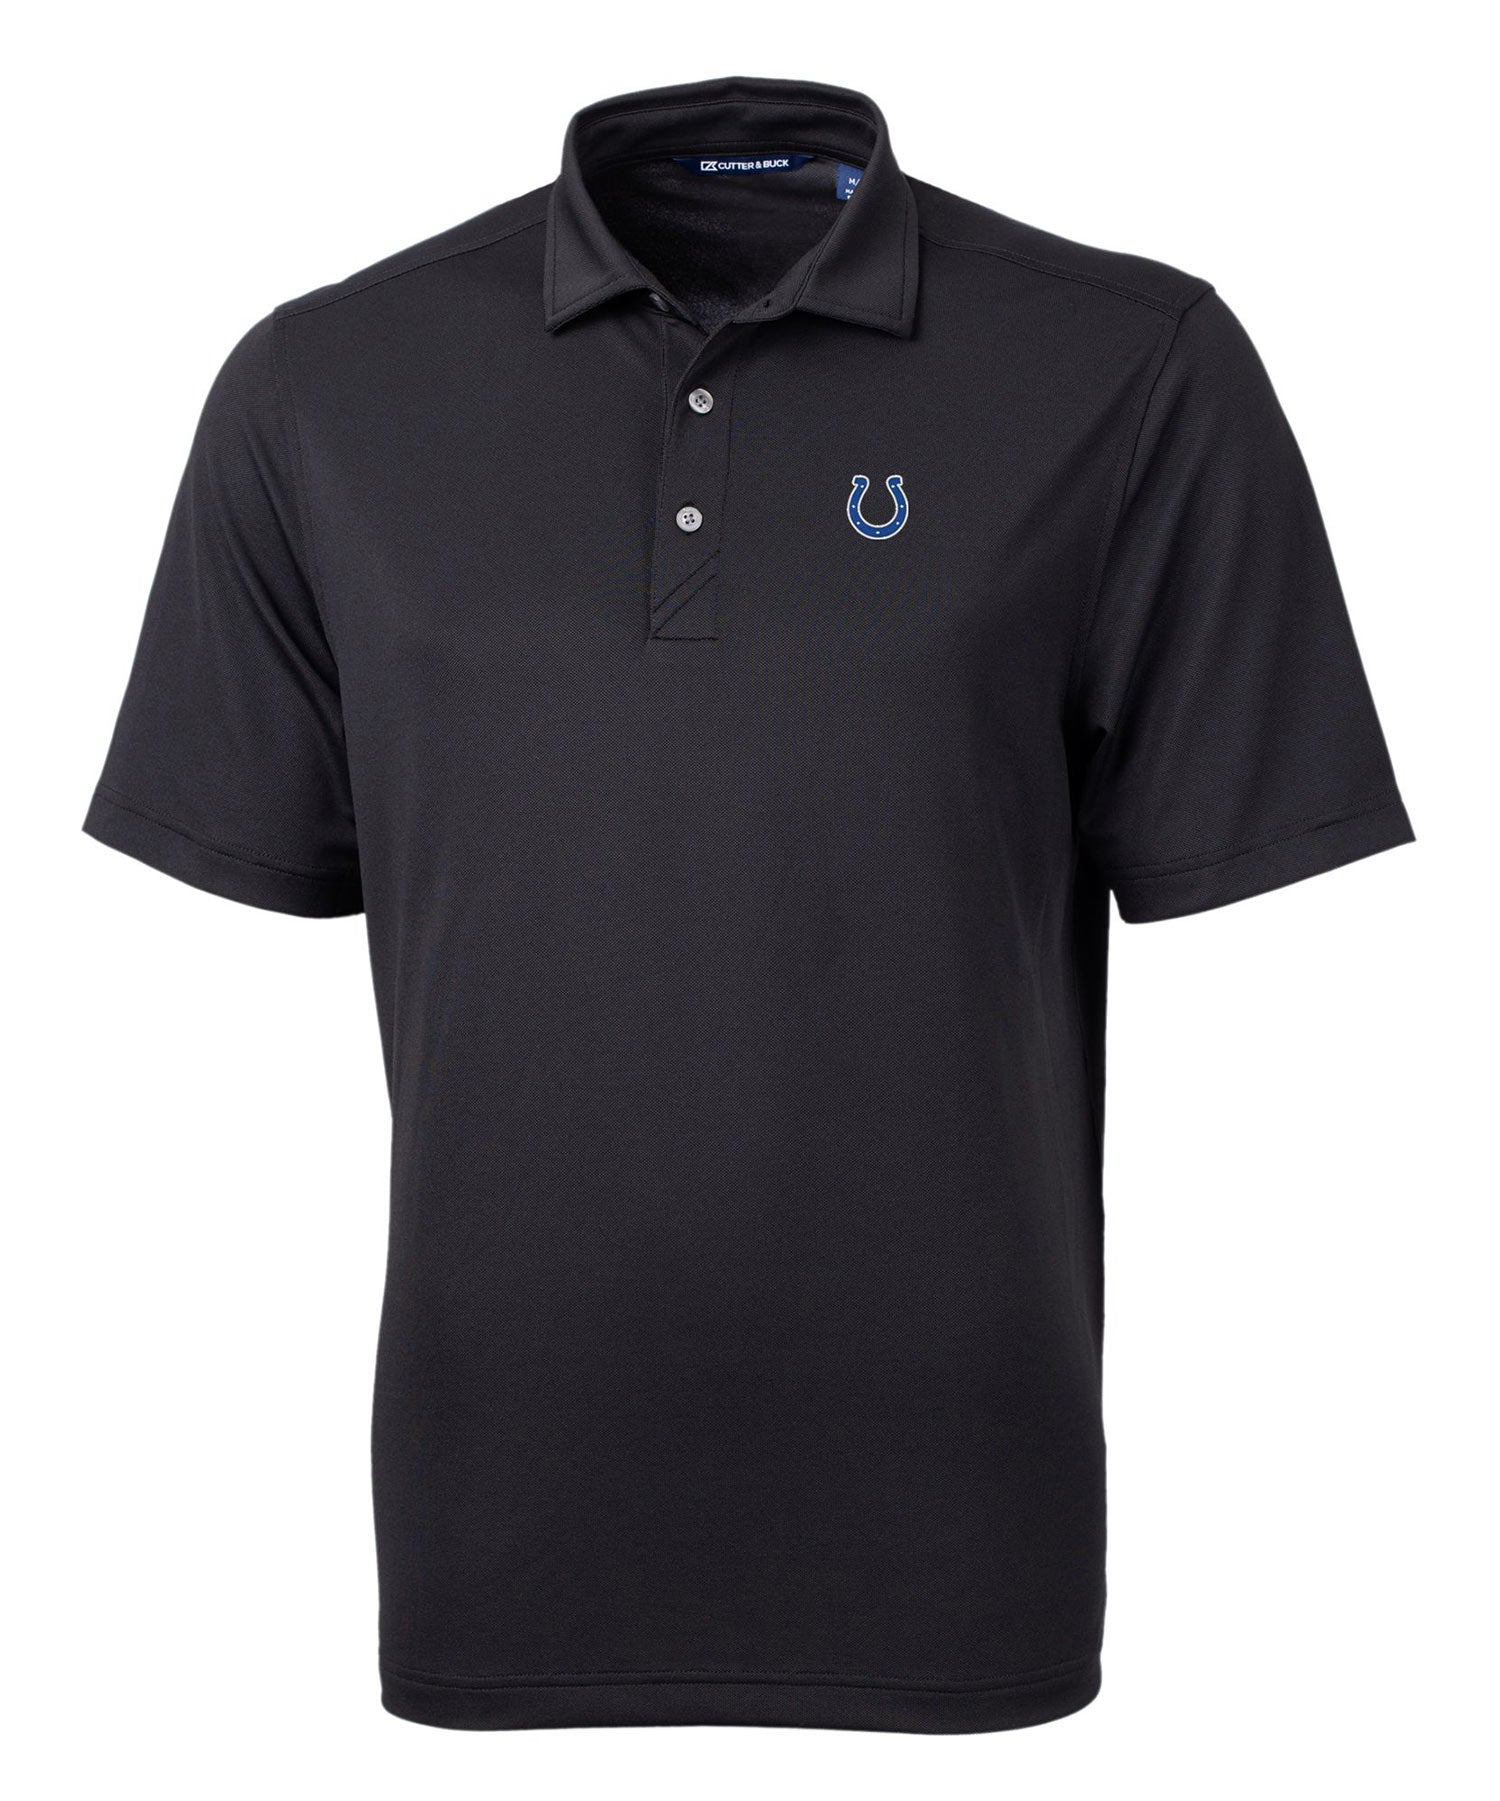 Cutter & Buck Indianapolis Colts Short Sleeve Polo Knit Shirt, Men's Big & Tall